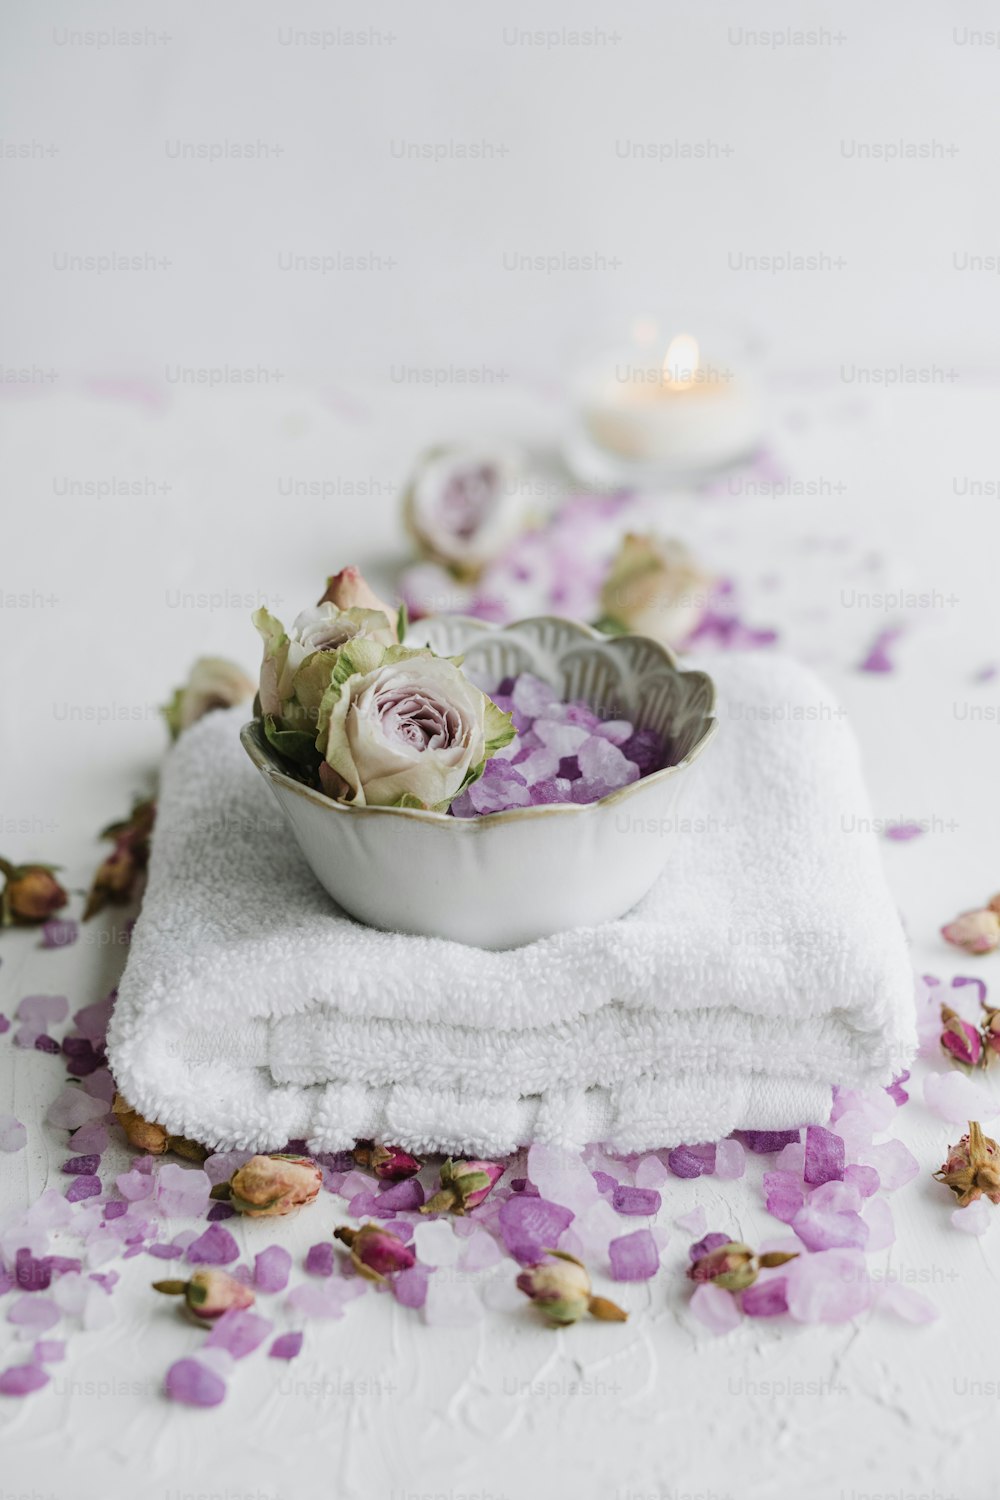 a bowl of flowers on a towel on a table